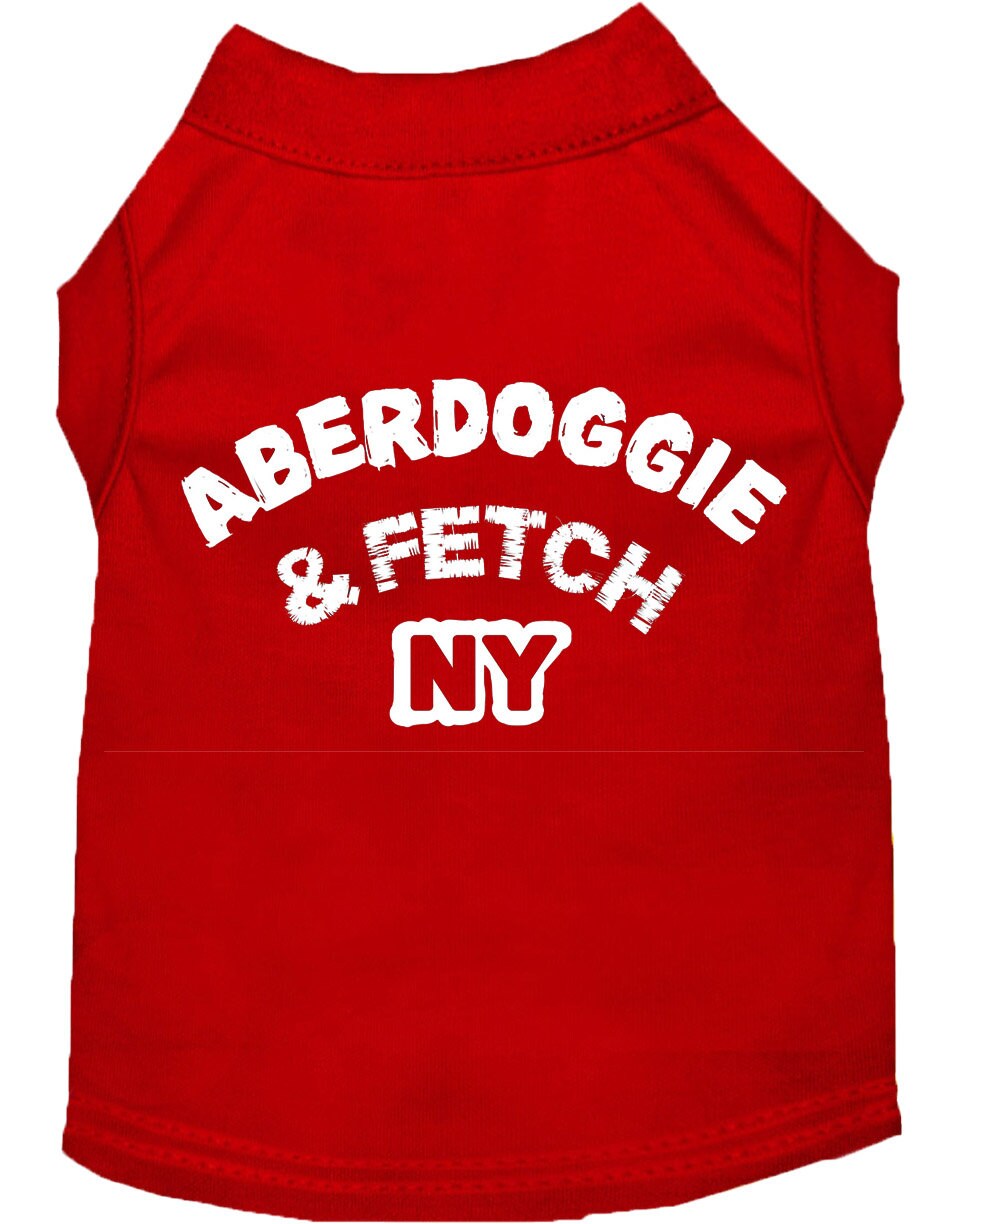 Pet Dog & Cat Shirt Screen Printed, "Aberdoggie and Fetch NY"